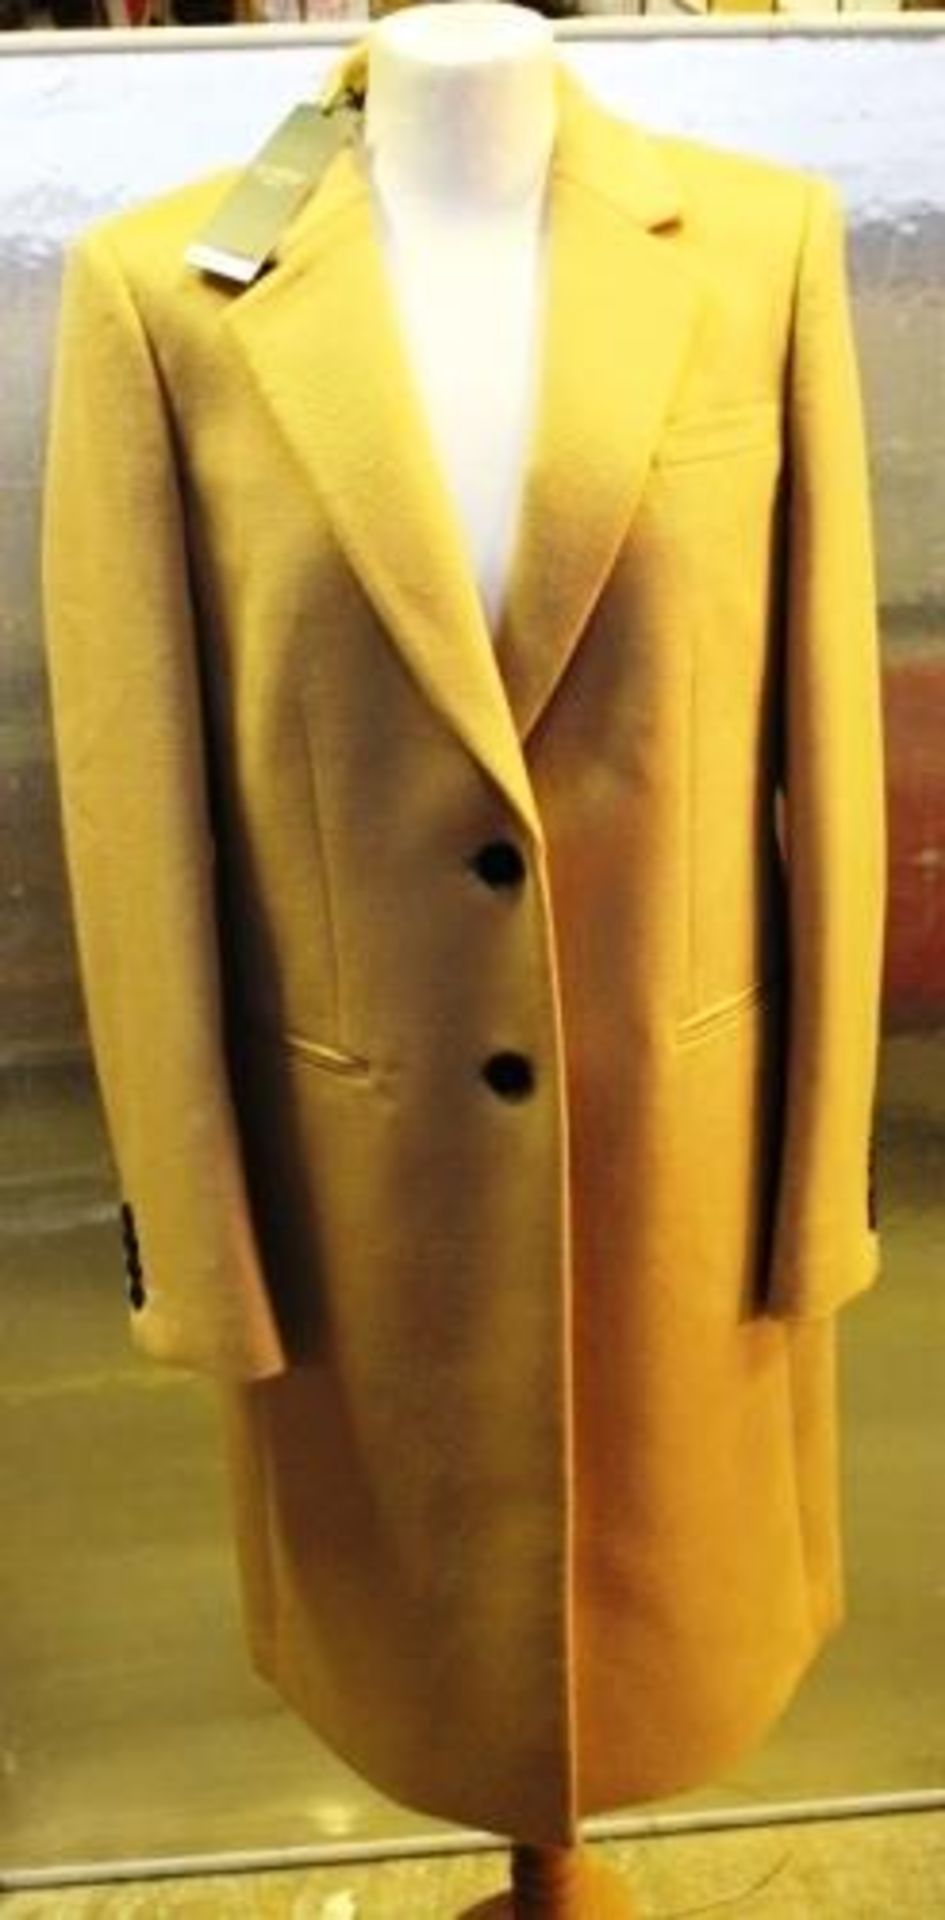 1 x Hobbs Tilda camel wool coat, UK size 8, RRP £299.00 - New with tags (clothesrail1)